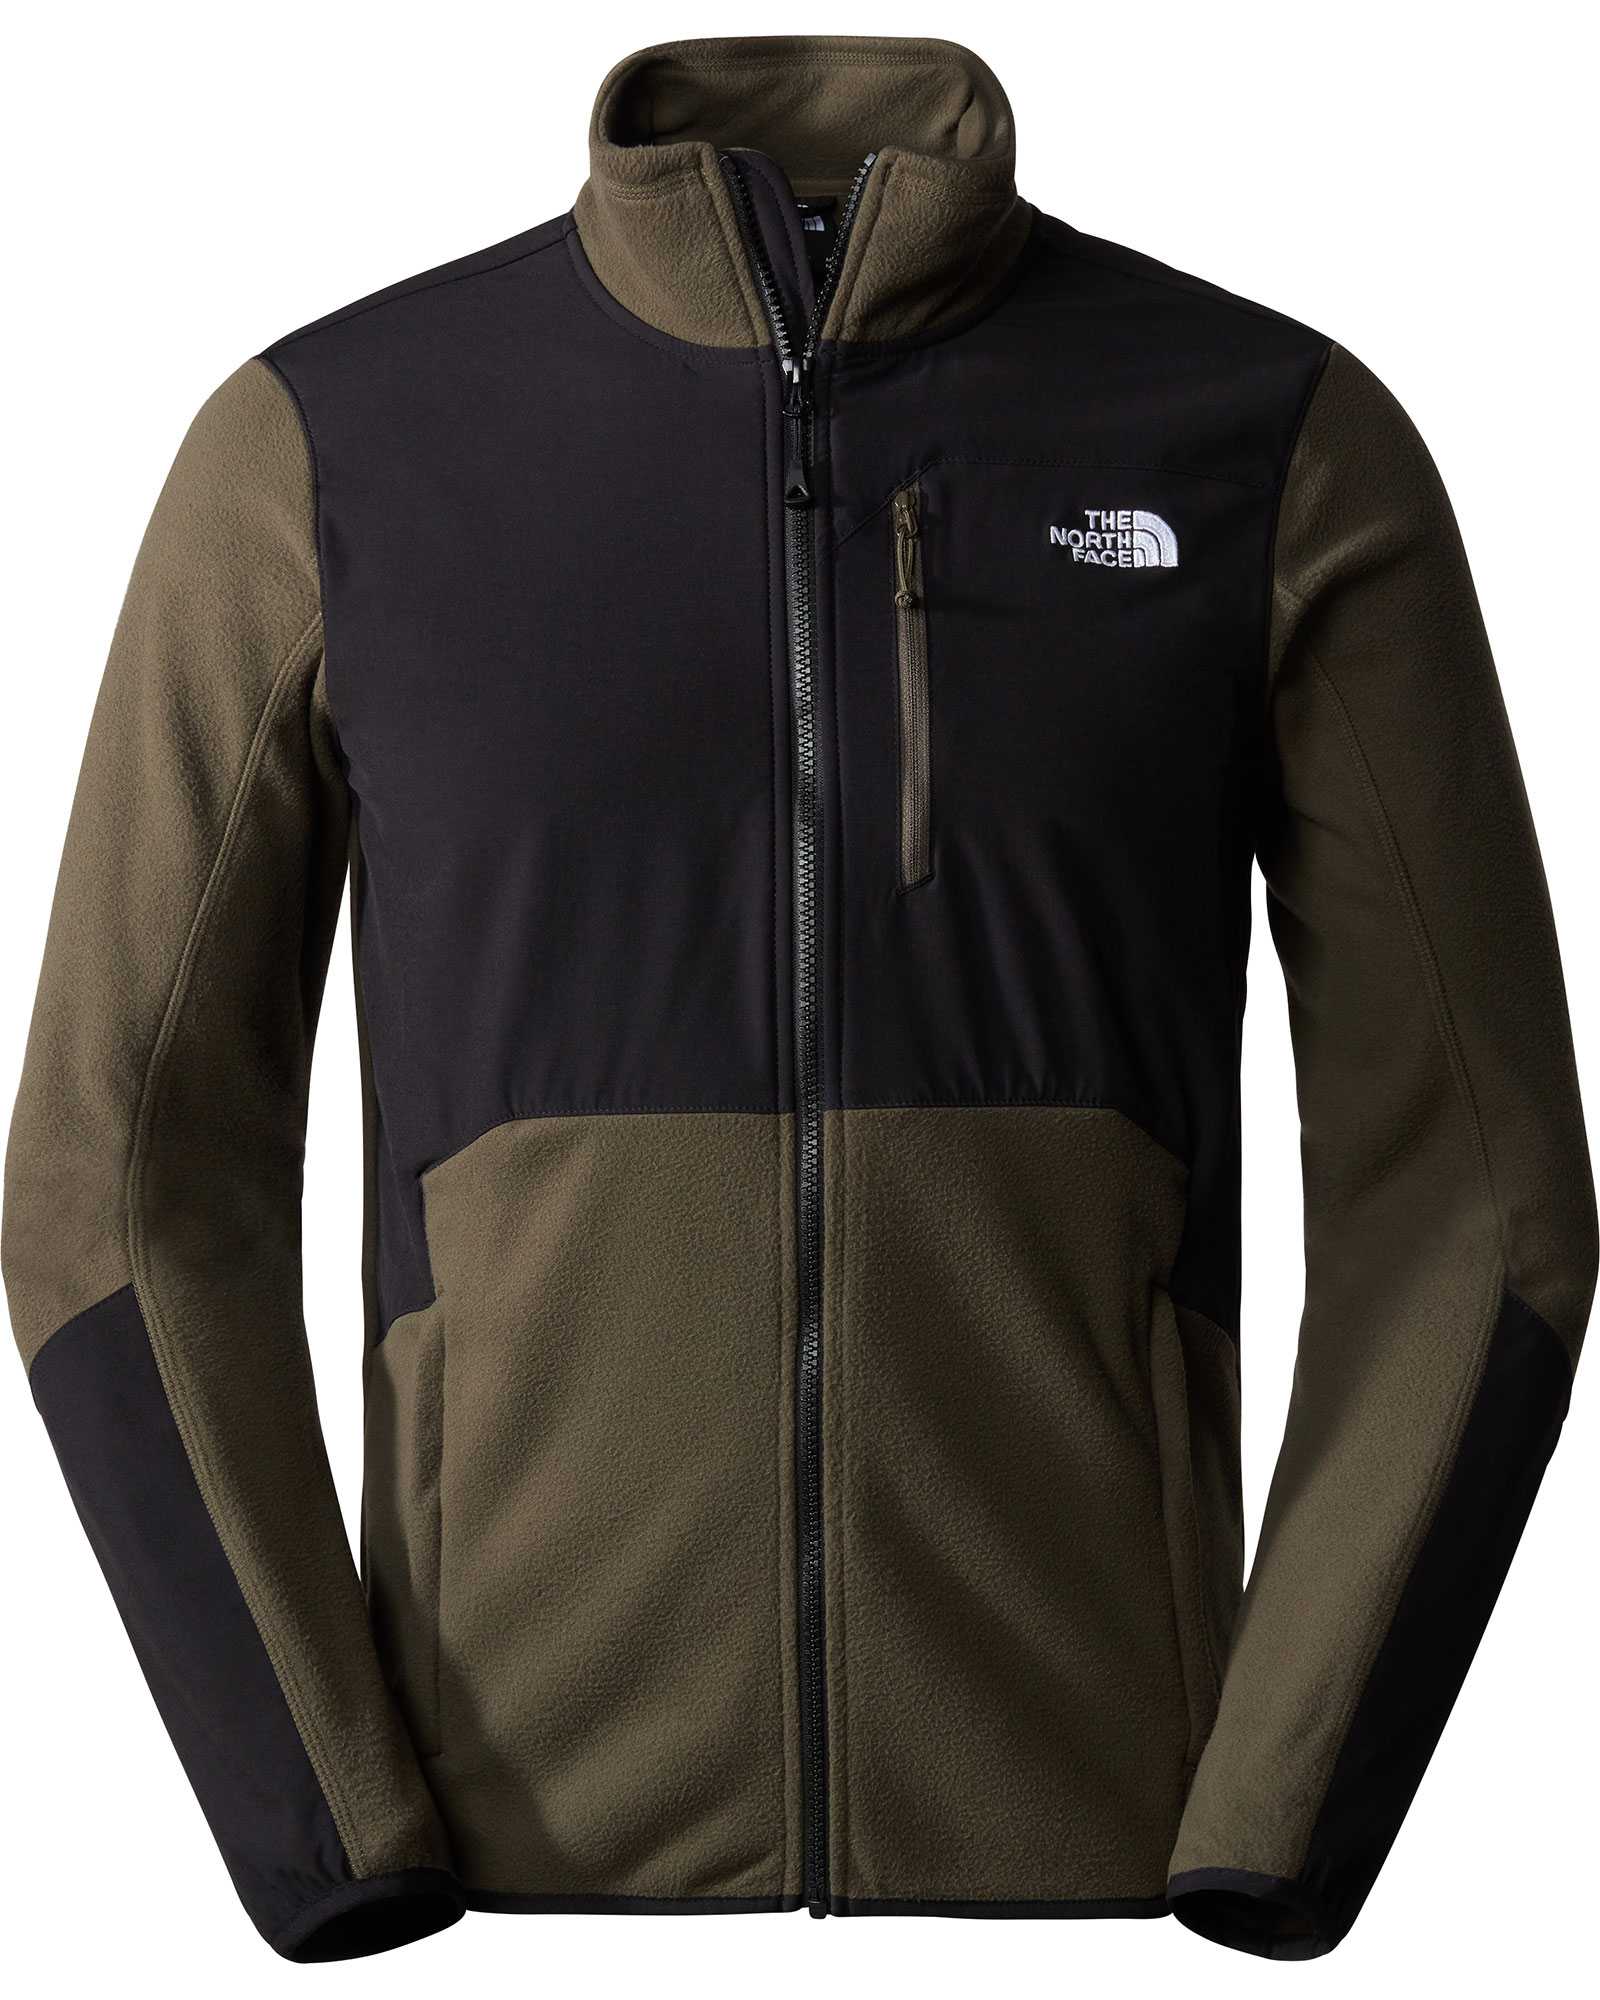 The North Face Glacier Pro Men’s Full Zip Jacket - New Taupe Green/TNF Black XL